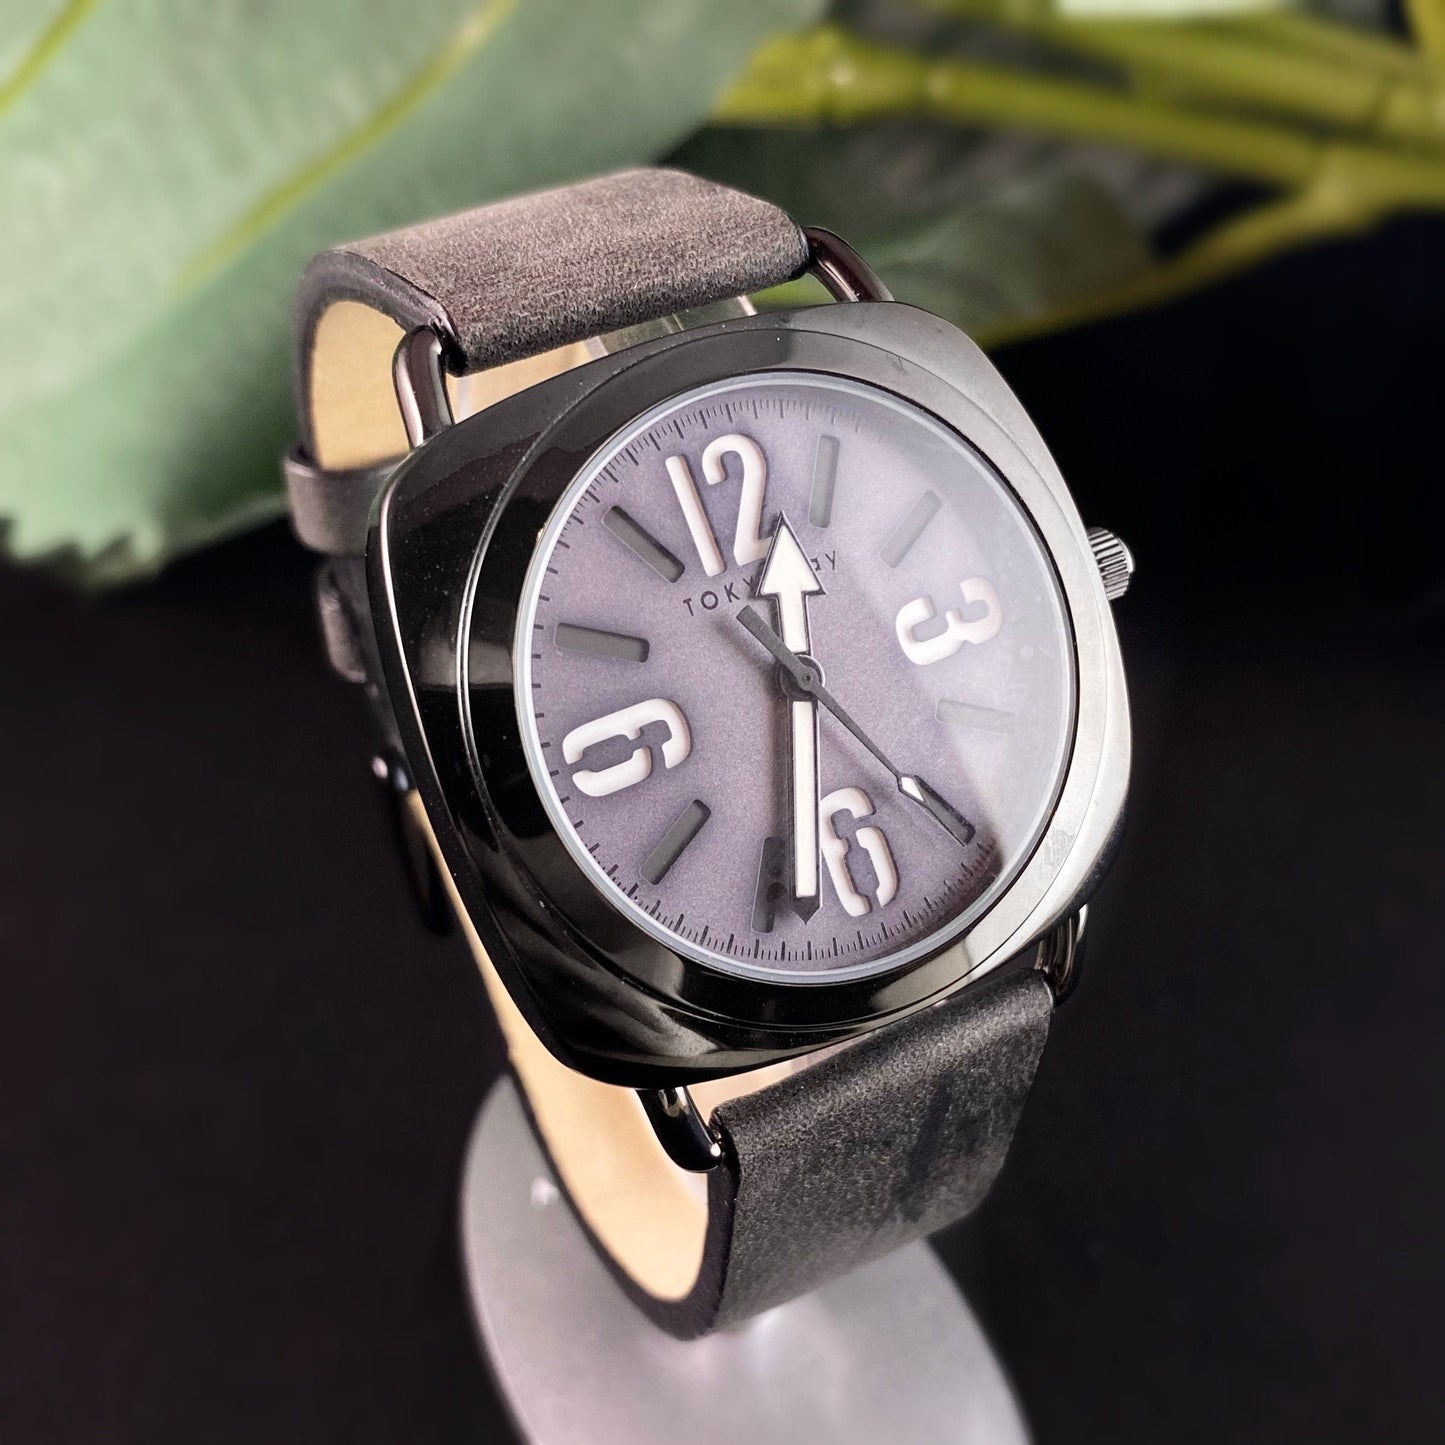 Men’s Watch, Gray Leather Band, Square Case - TOKYObay